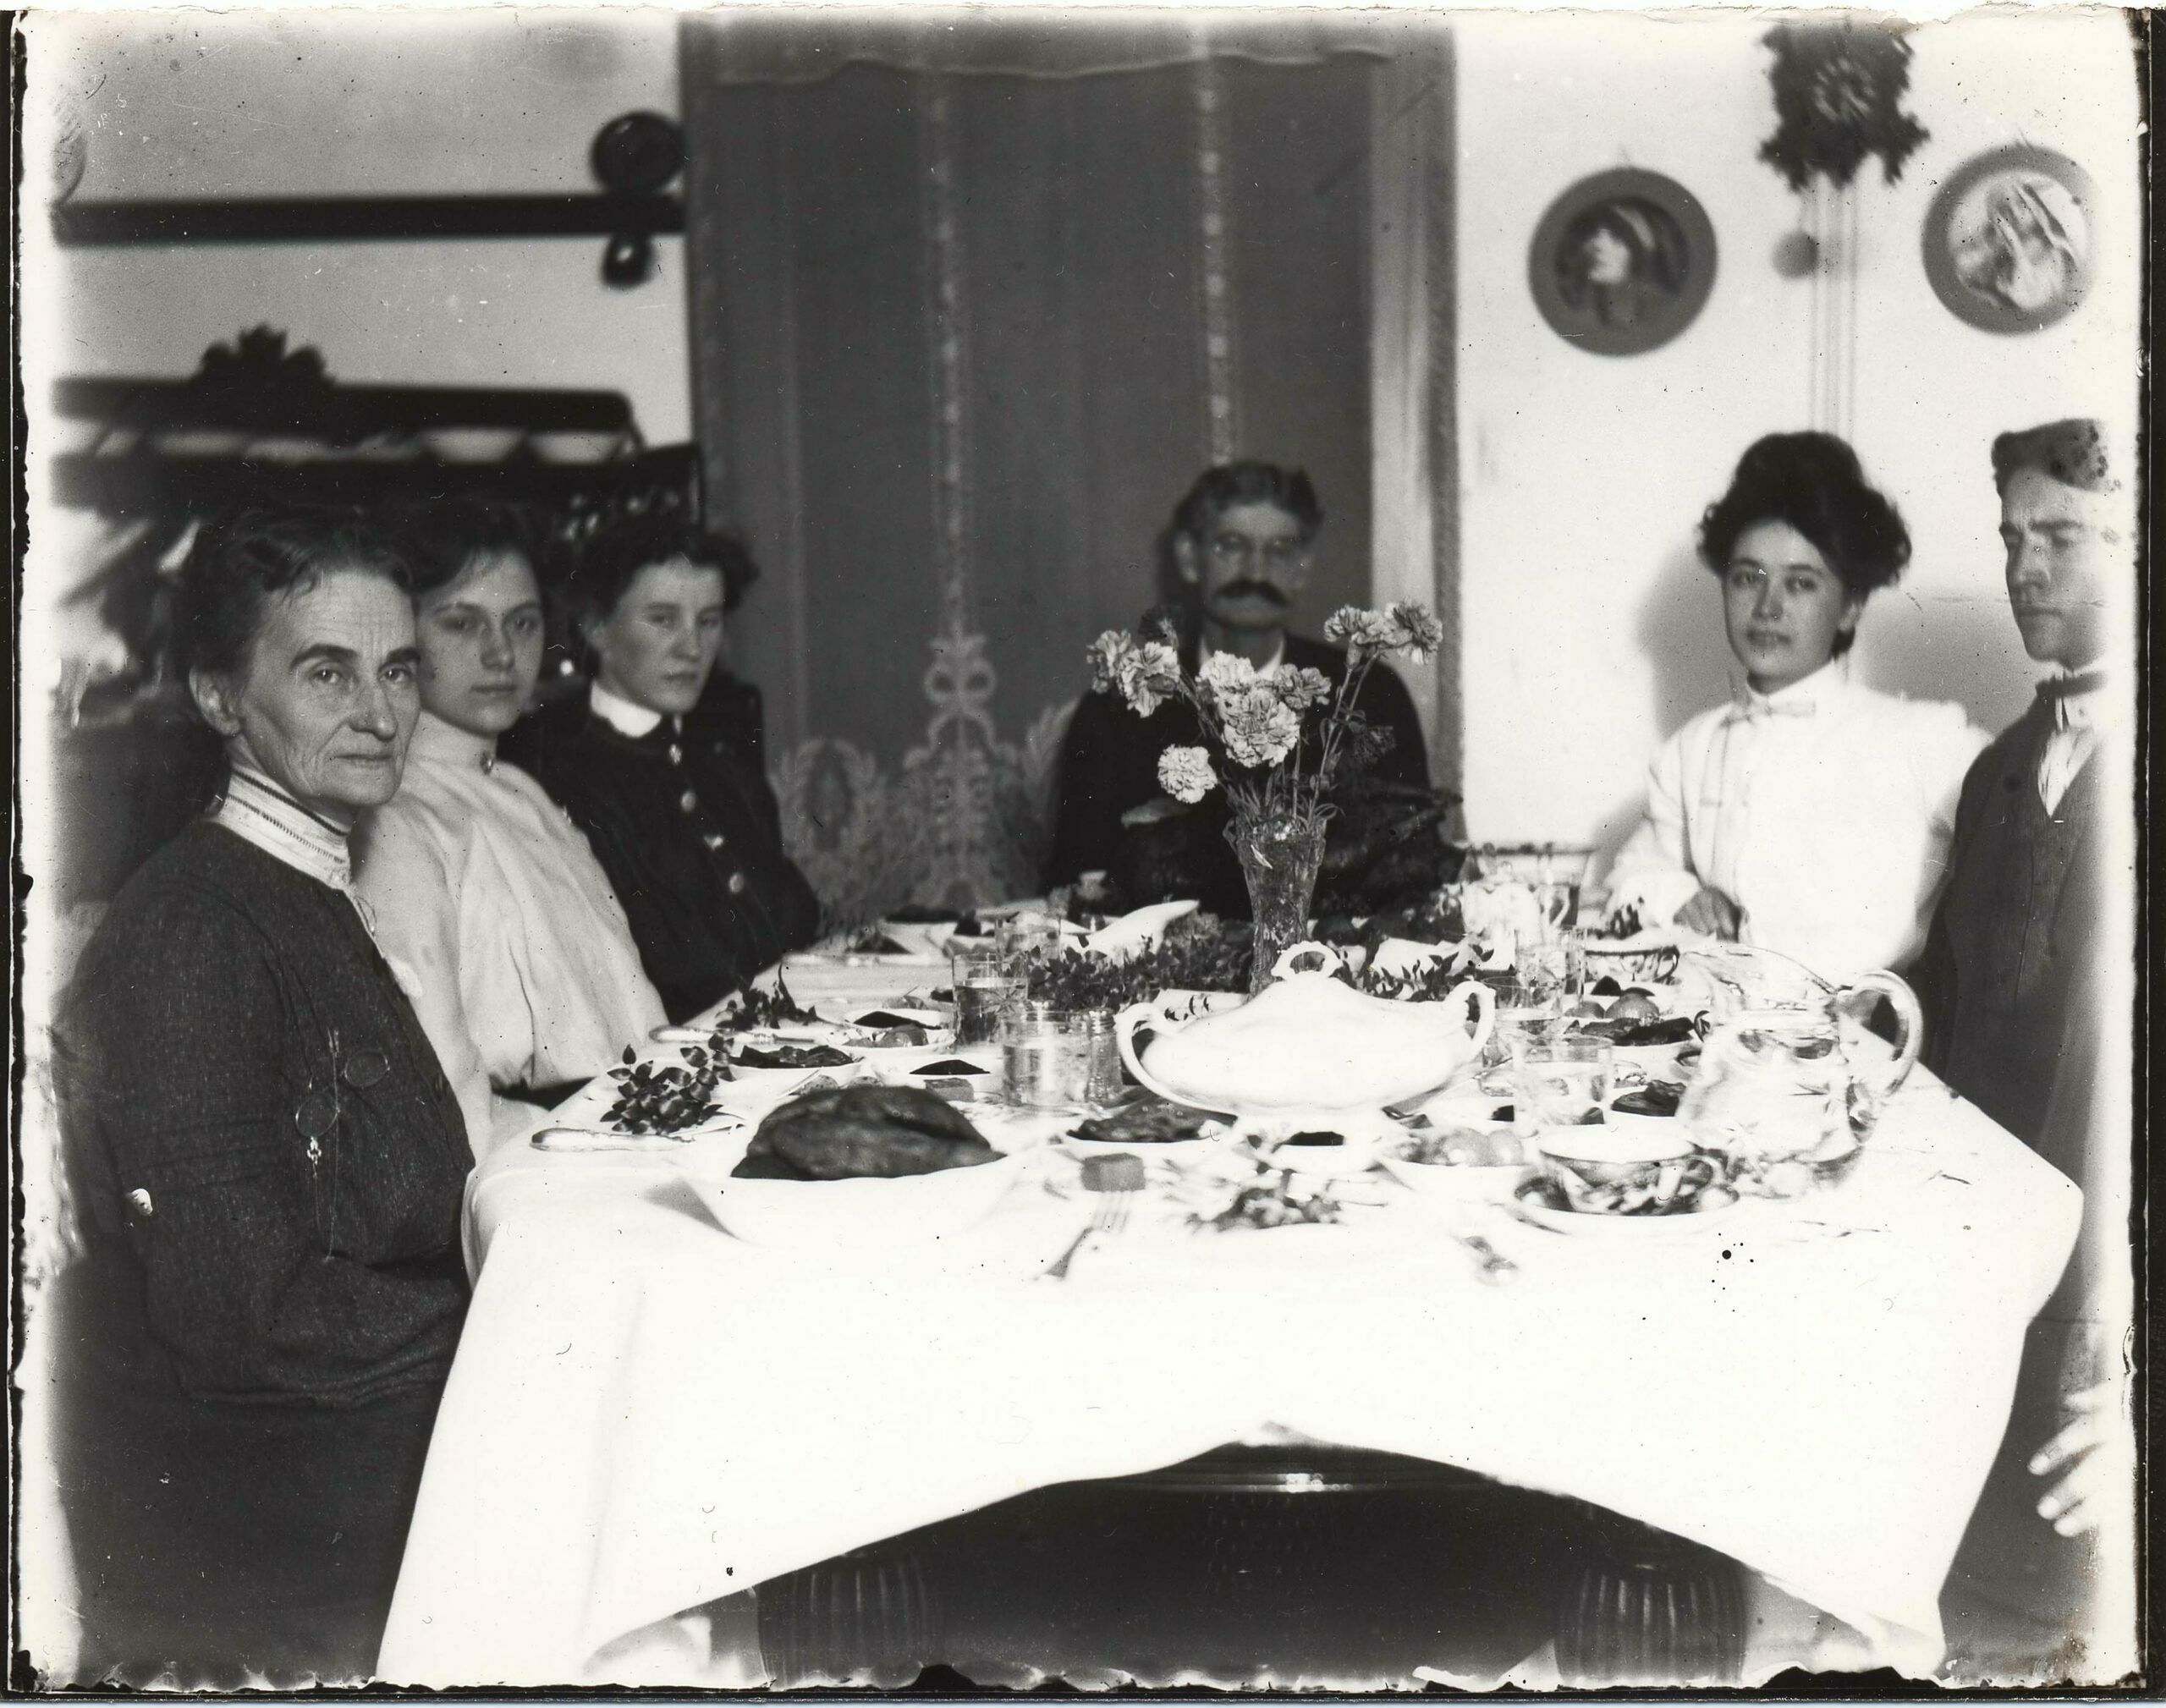 From left; Mary E., Alberta, Winona and Albert E. Hanks, other two on right unknown.